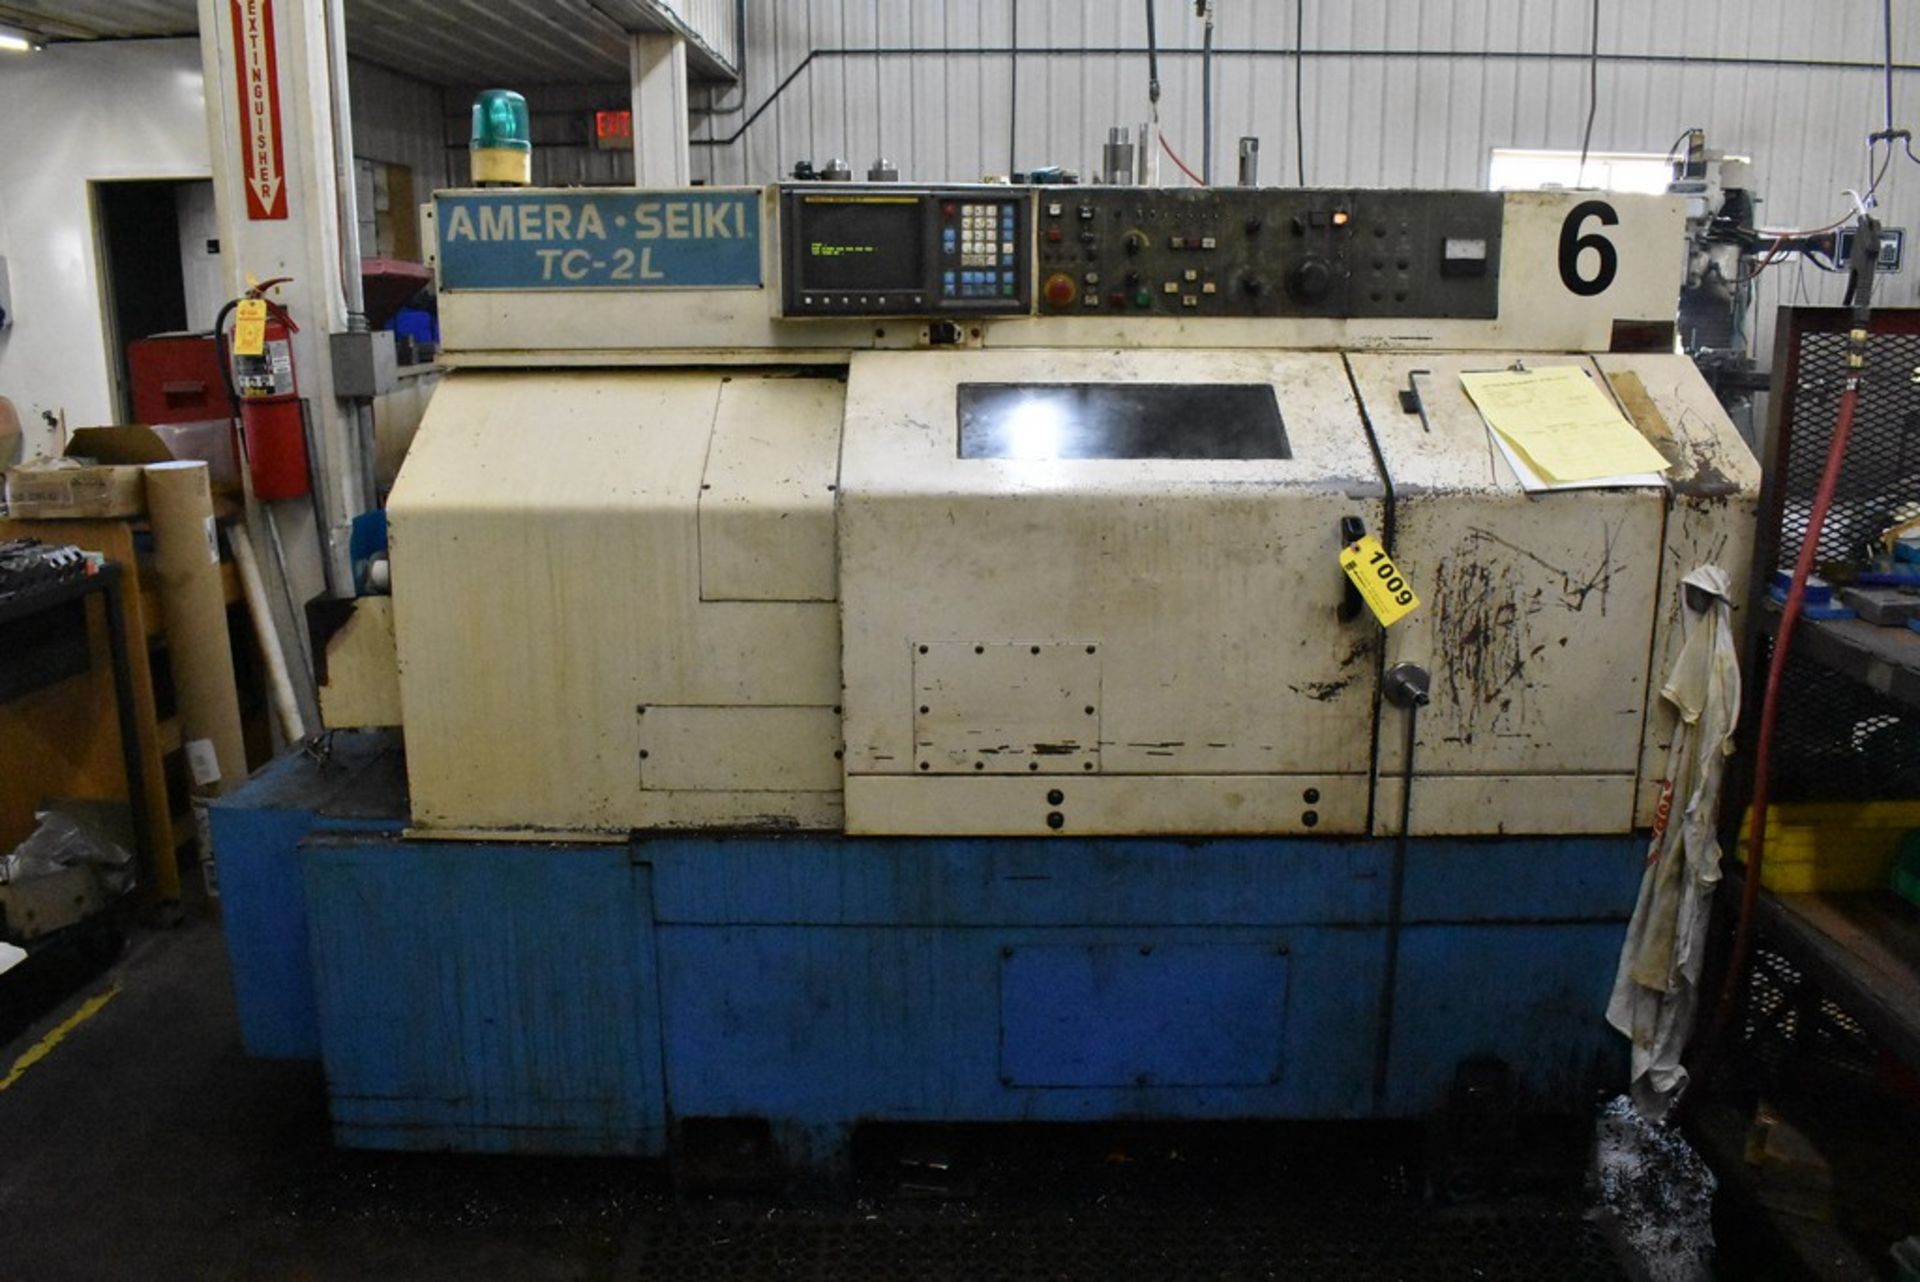 AMERA-SEIKI MODEL TC-2L CNC TURNING CENTER, S/N 78770, WITH CHUCK, TAILSTOCK, FANUC SERIES O-T